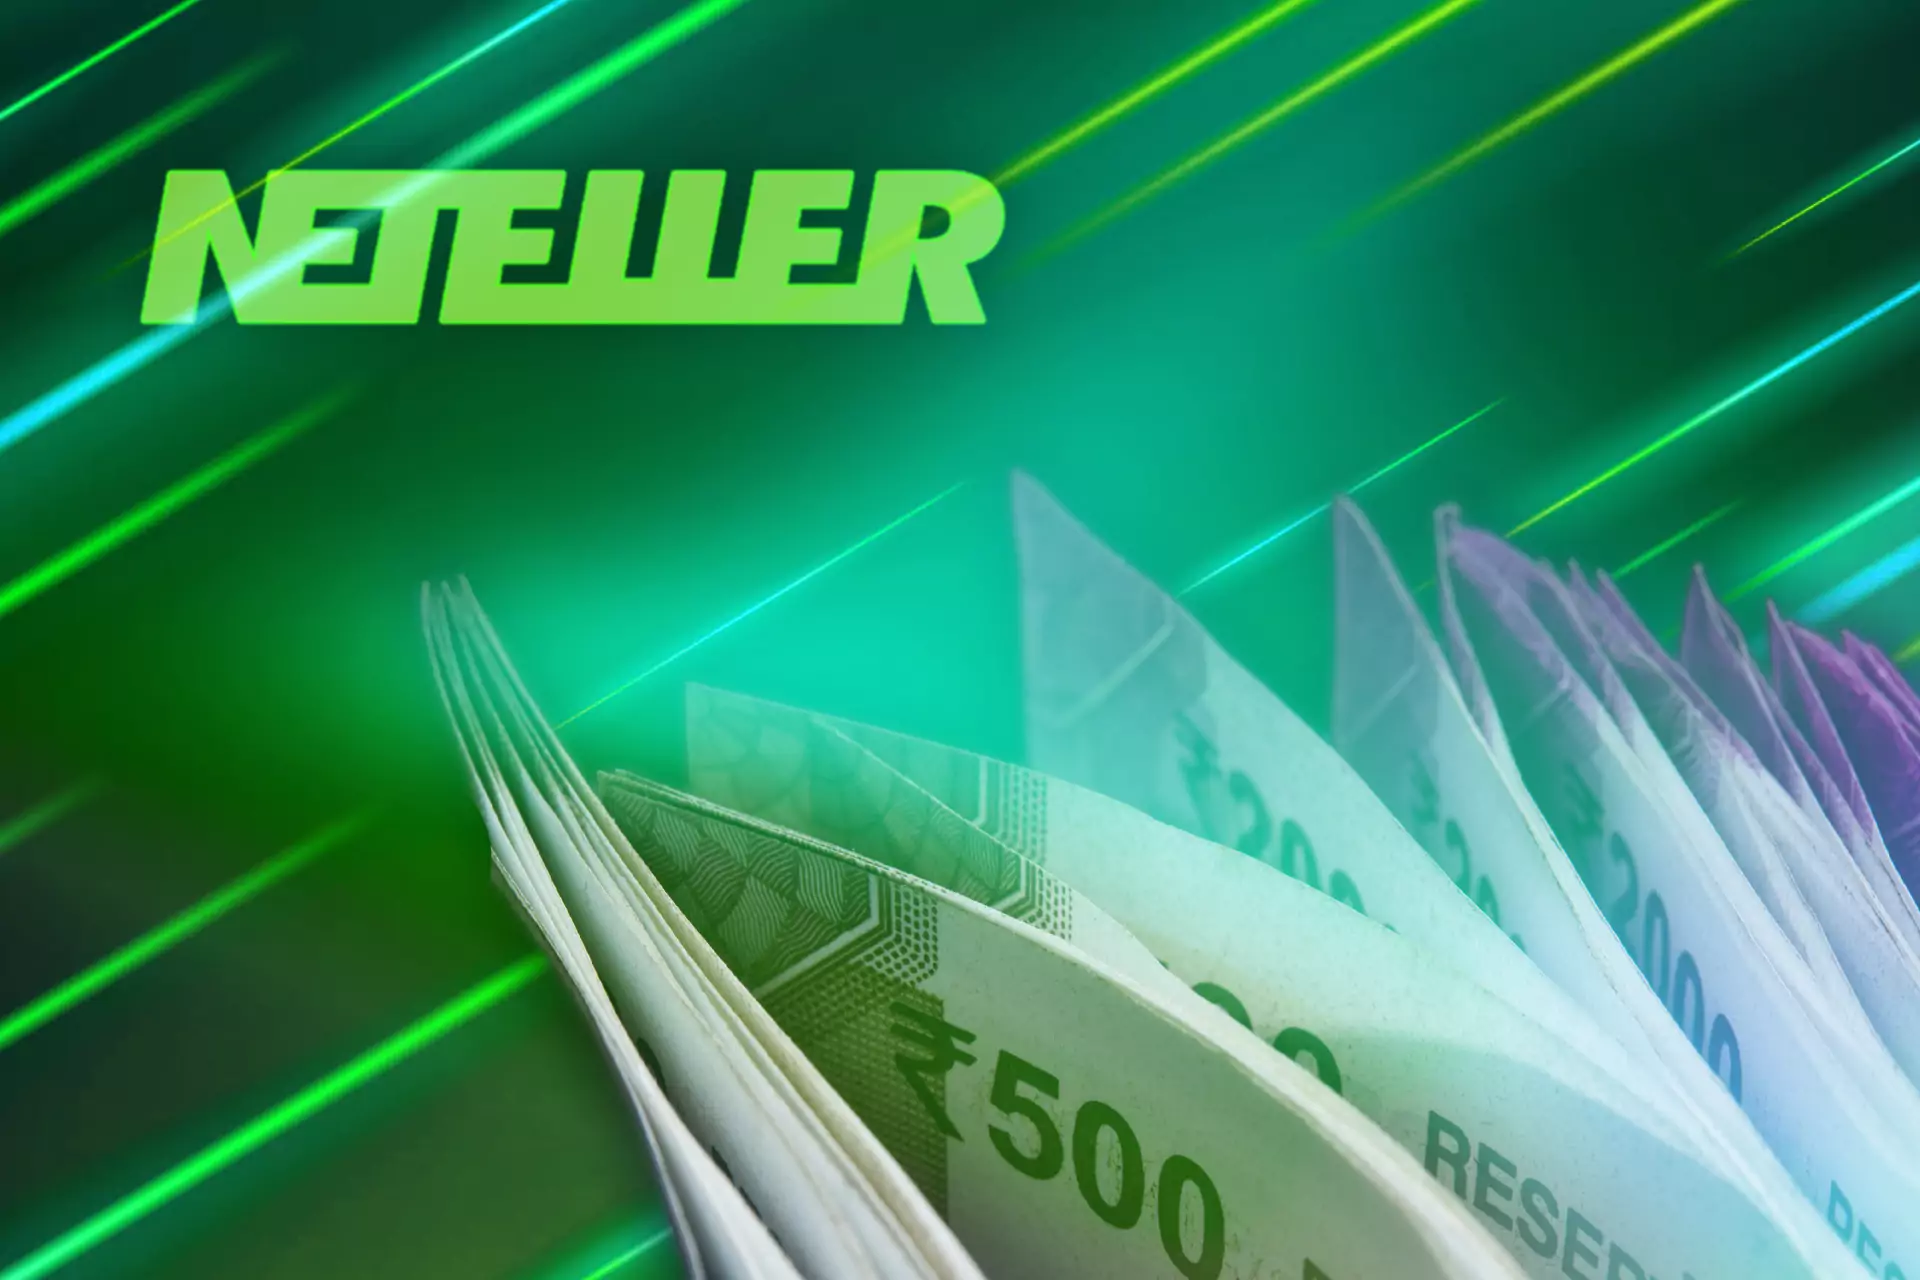 To open a wallet on Neteller you need to have only an email address.